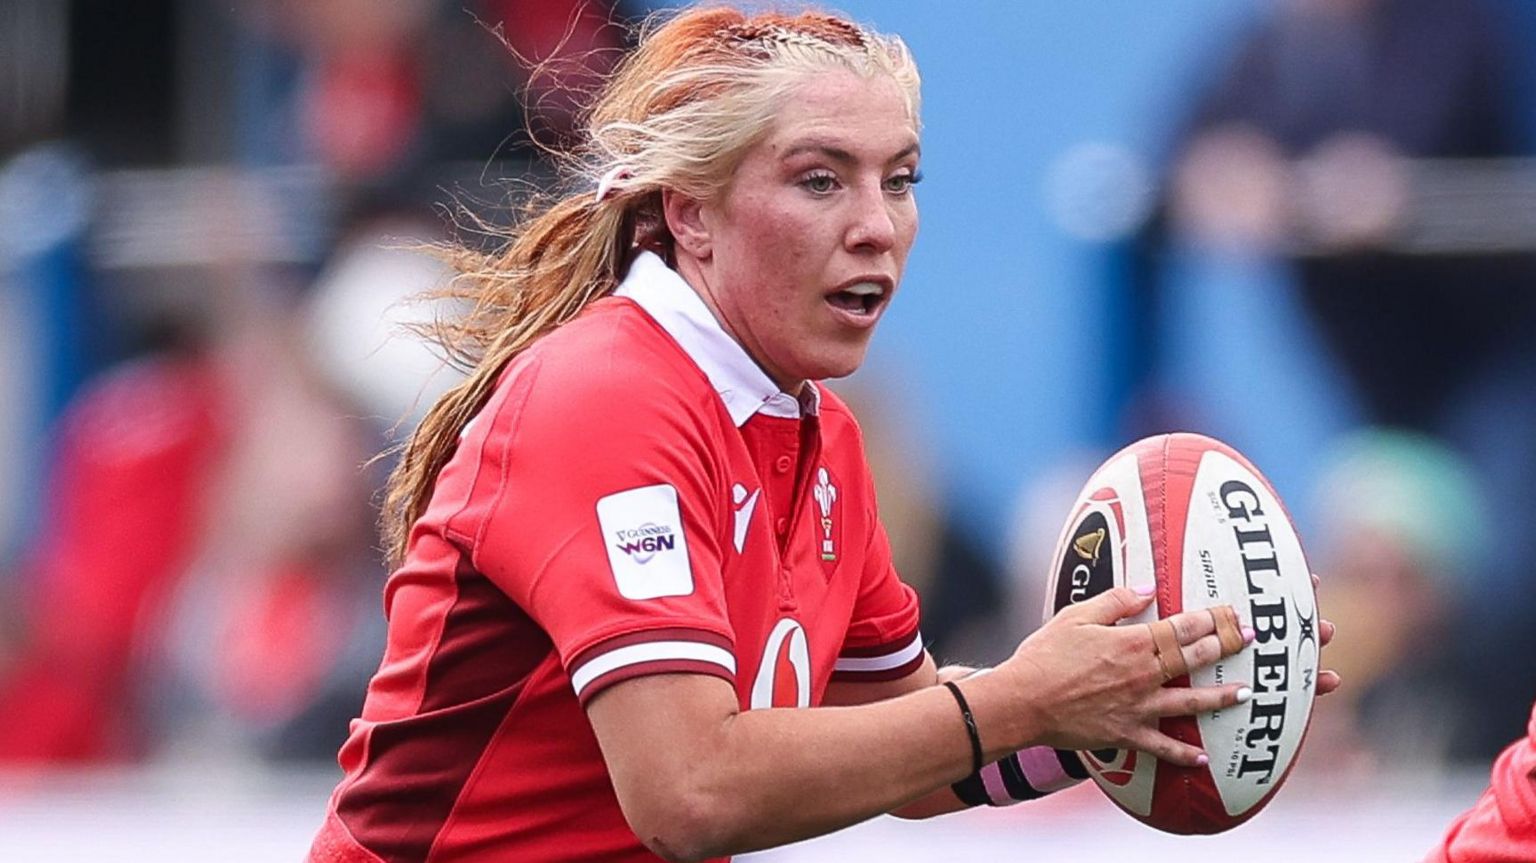 Georgia Evans attacks for Wales